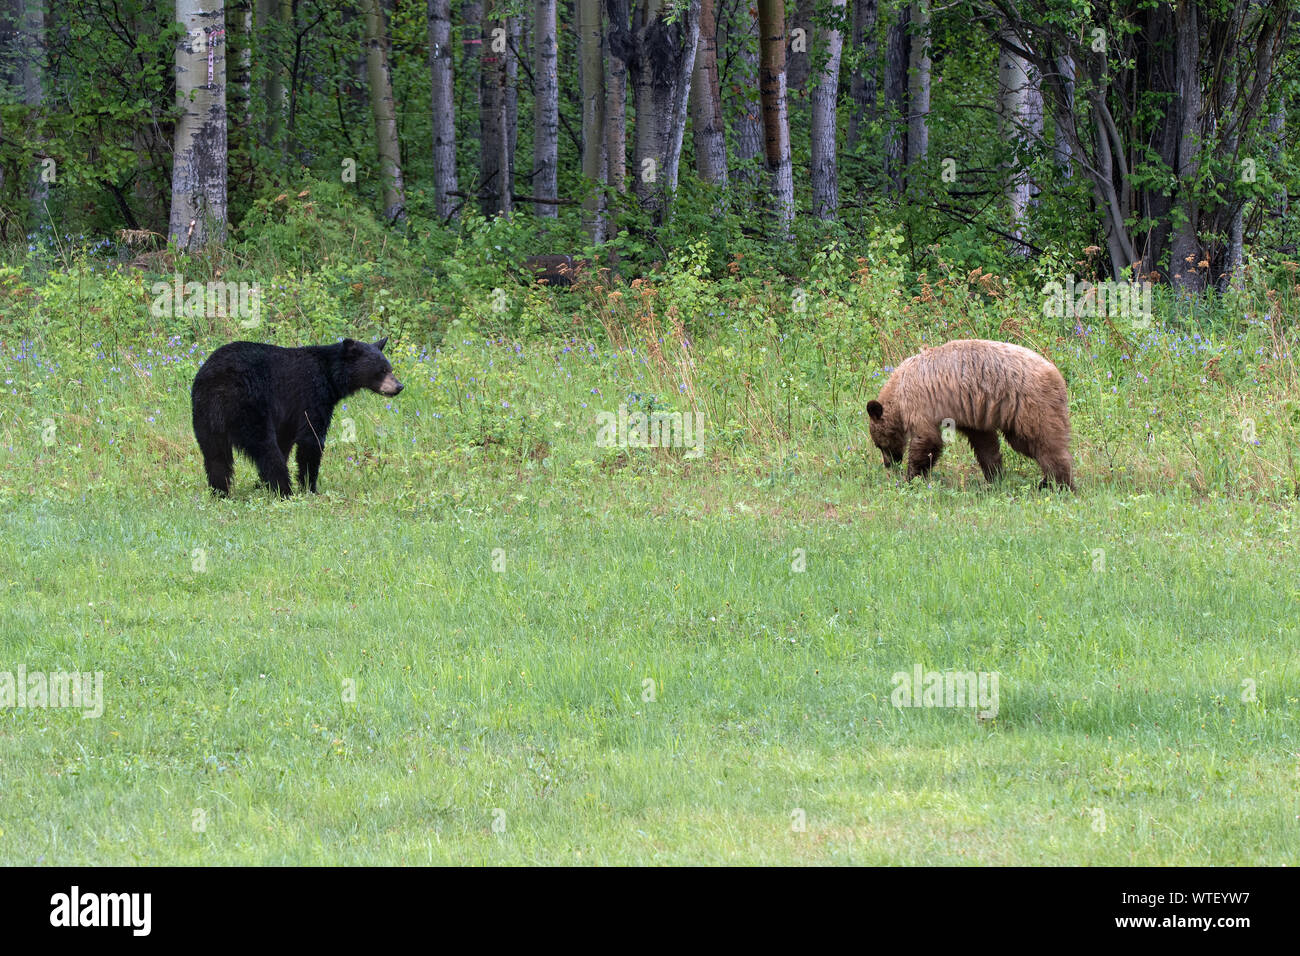 Two black bears (Ursus americanus) eating vegetation on the edge of a forest clearing. These two individuals clearly show the difference between the b Stock Photo